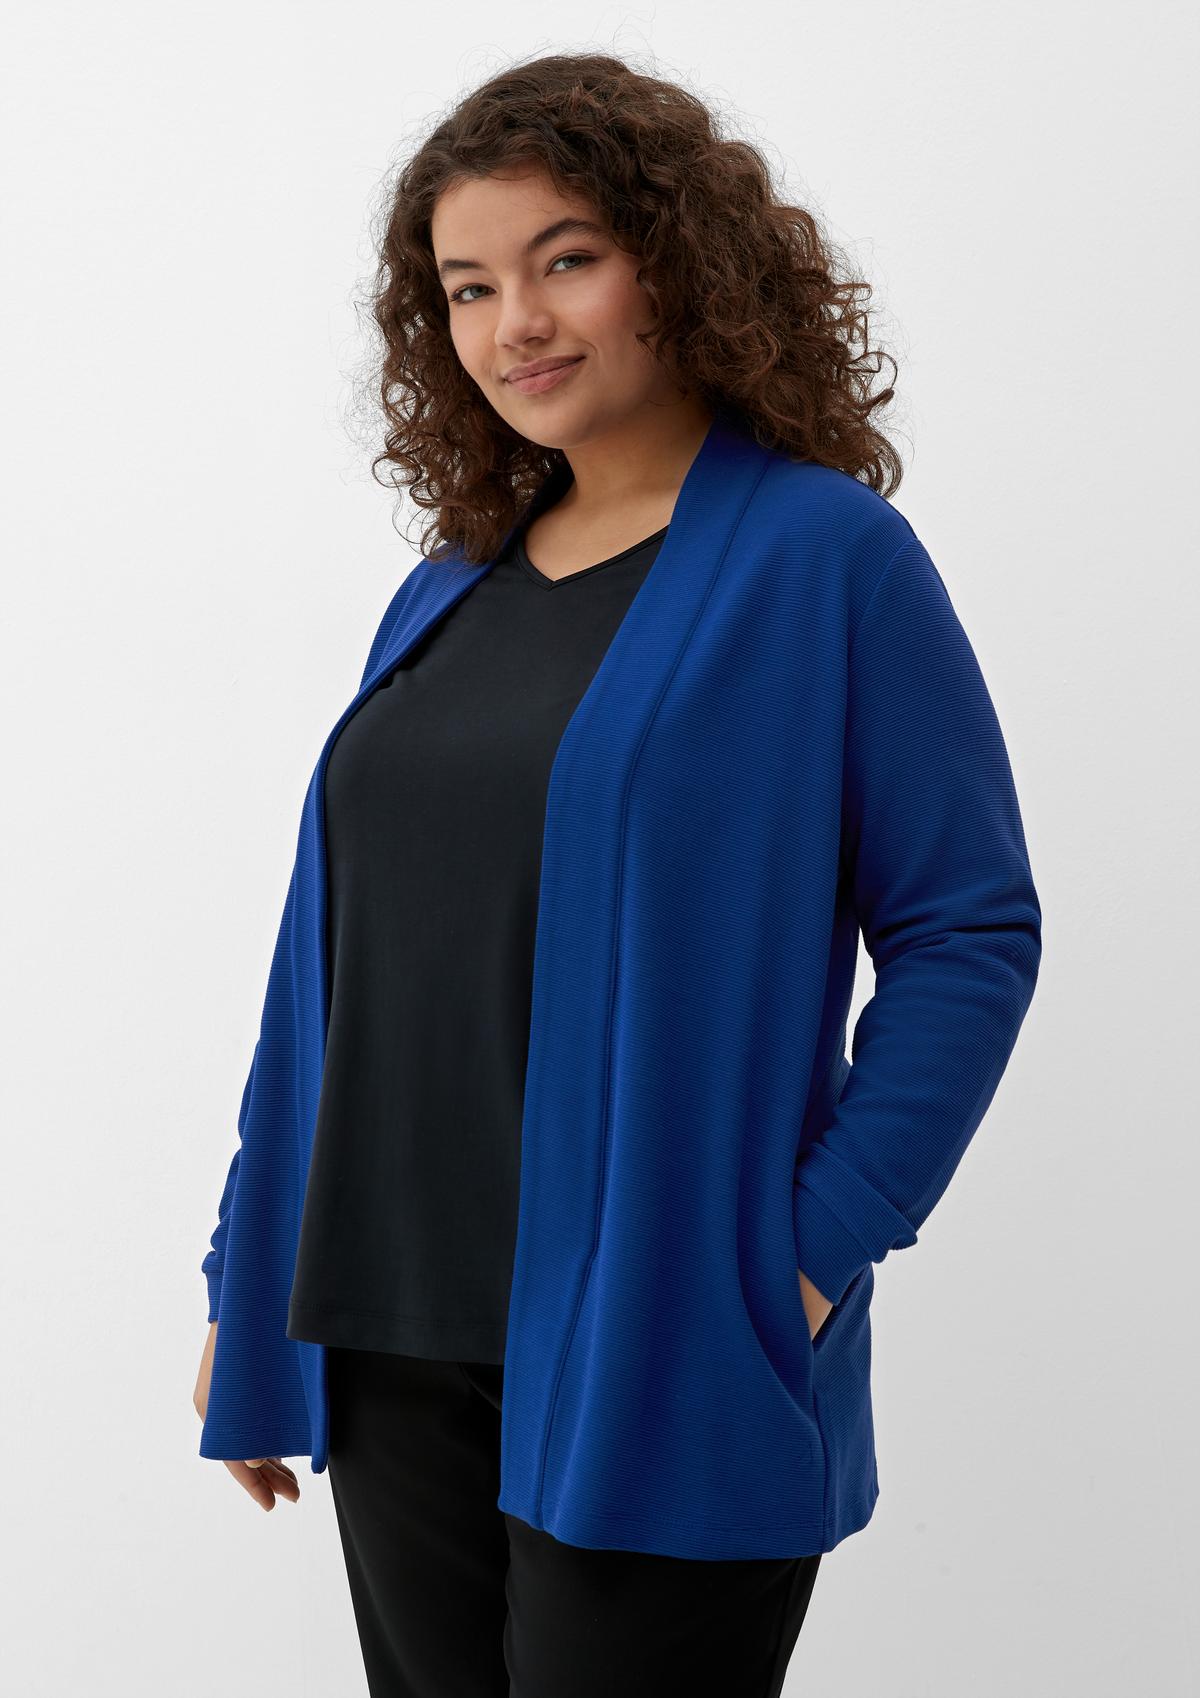 Cardigan with a ribbed texture - ocean blue | s.Oliver